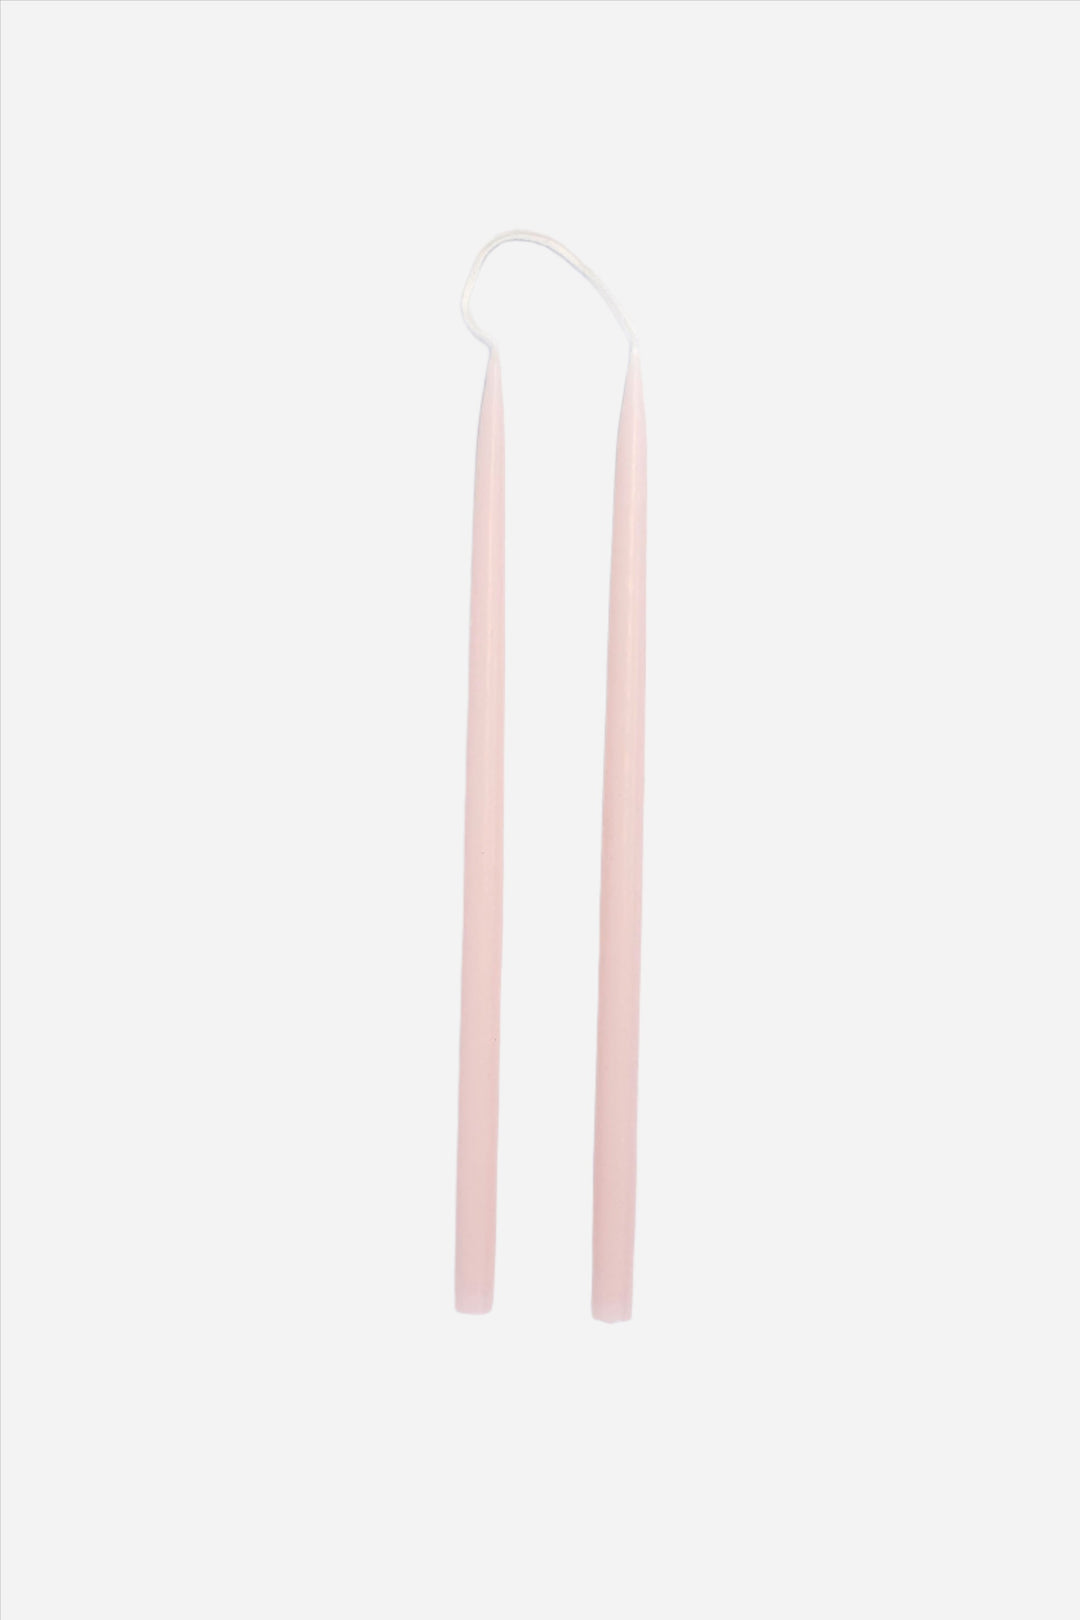 28cm Pair of Candles / Old Rose